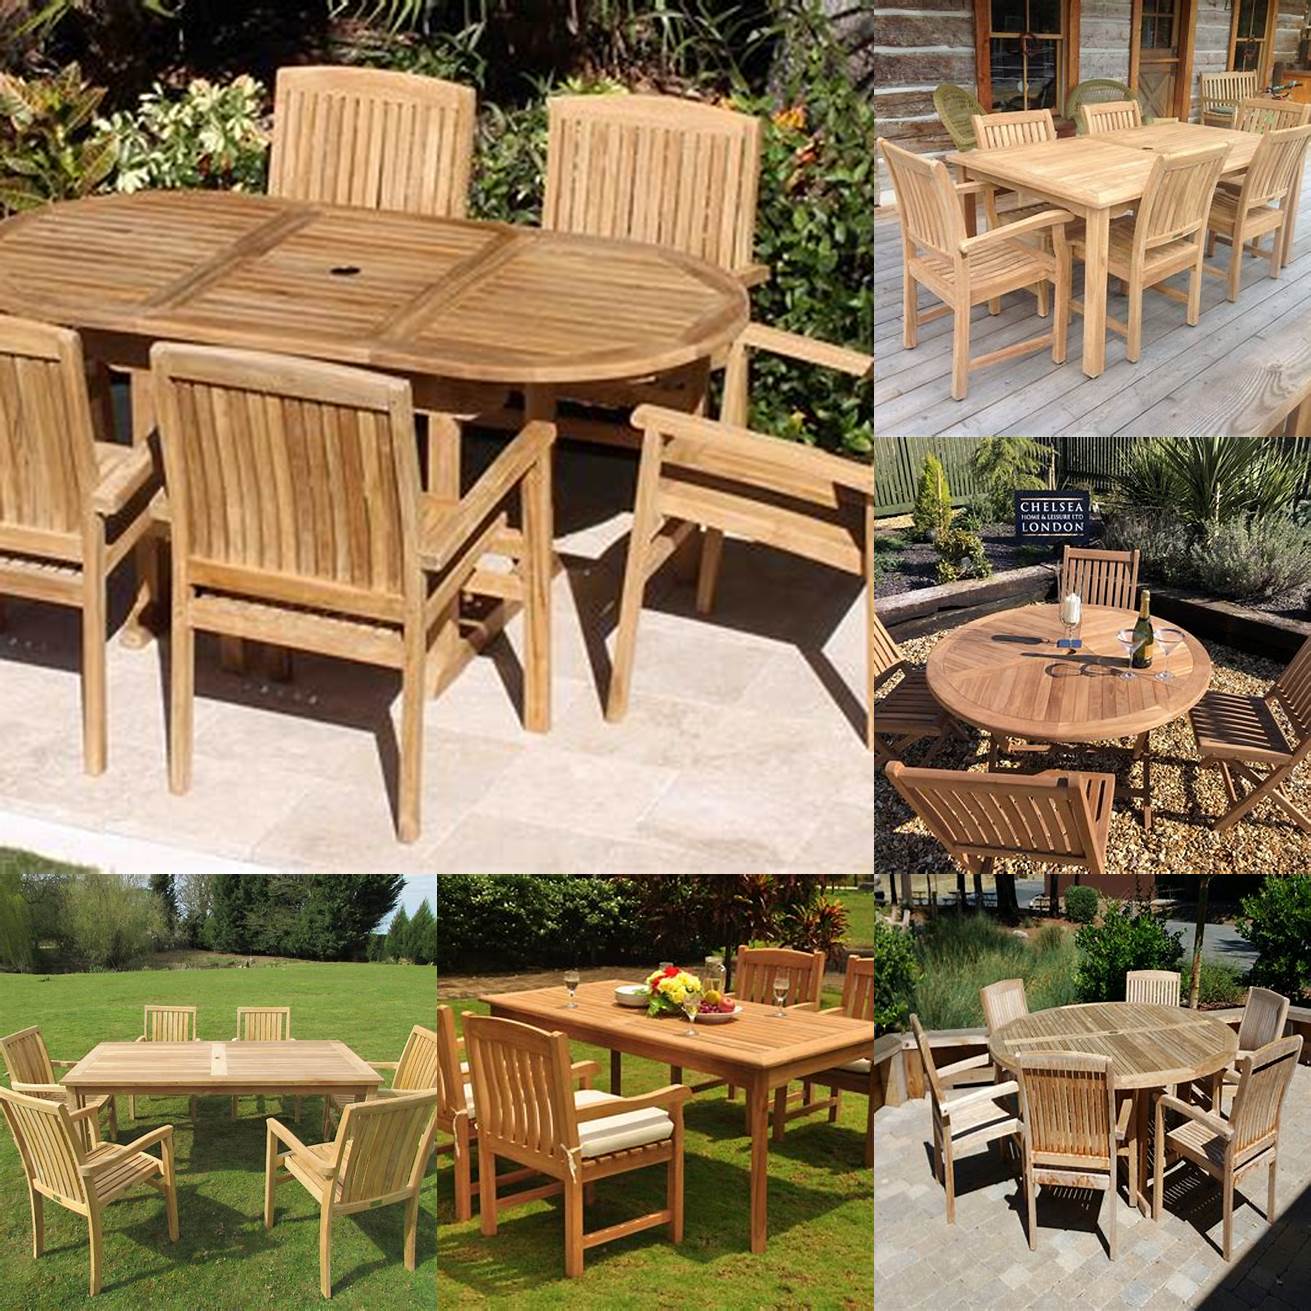 Teak Furniture in Different Environments